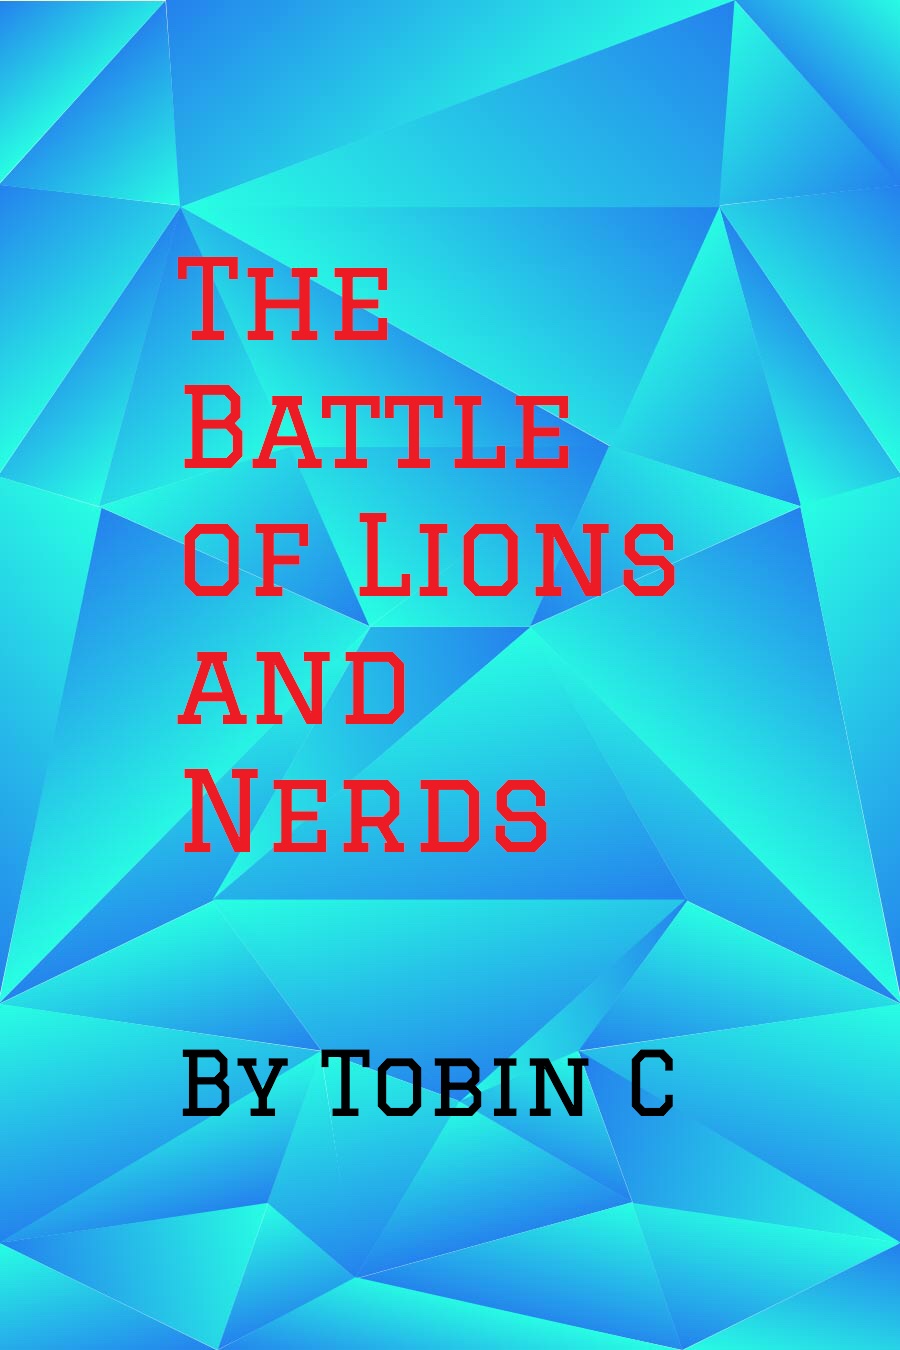 The Battle of Lions and Nerds by Tobin C